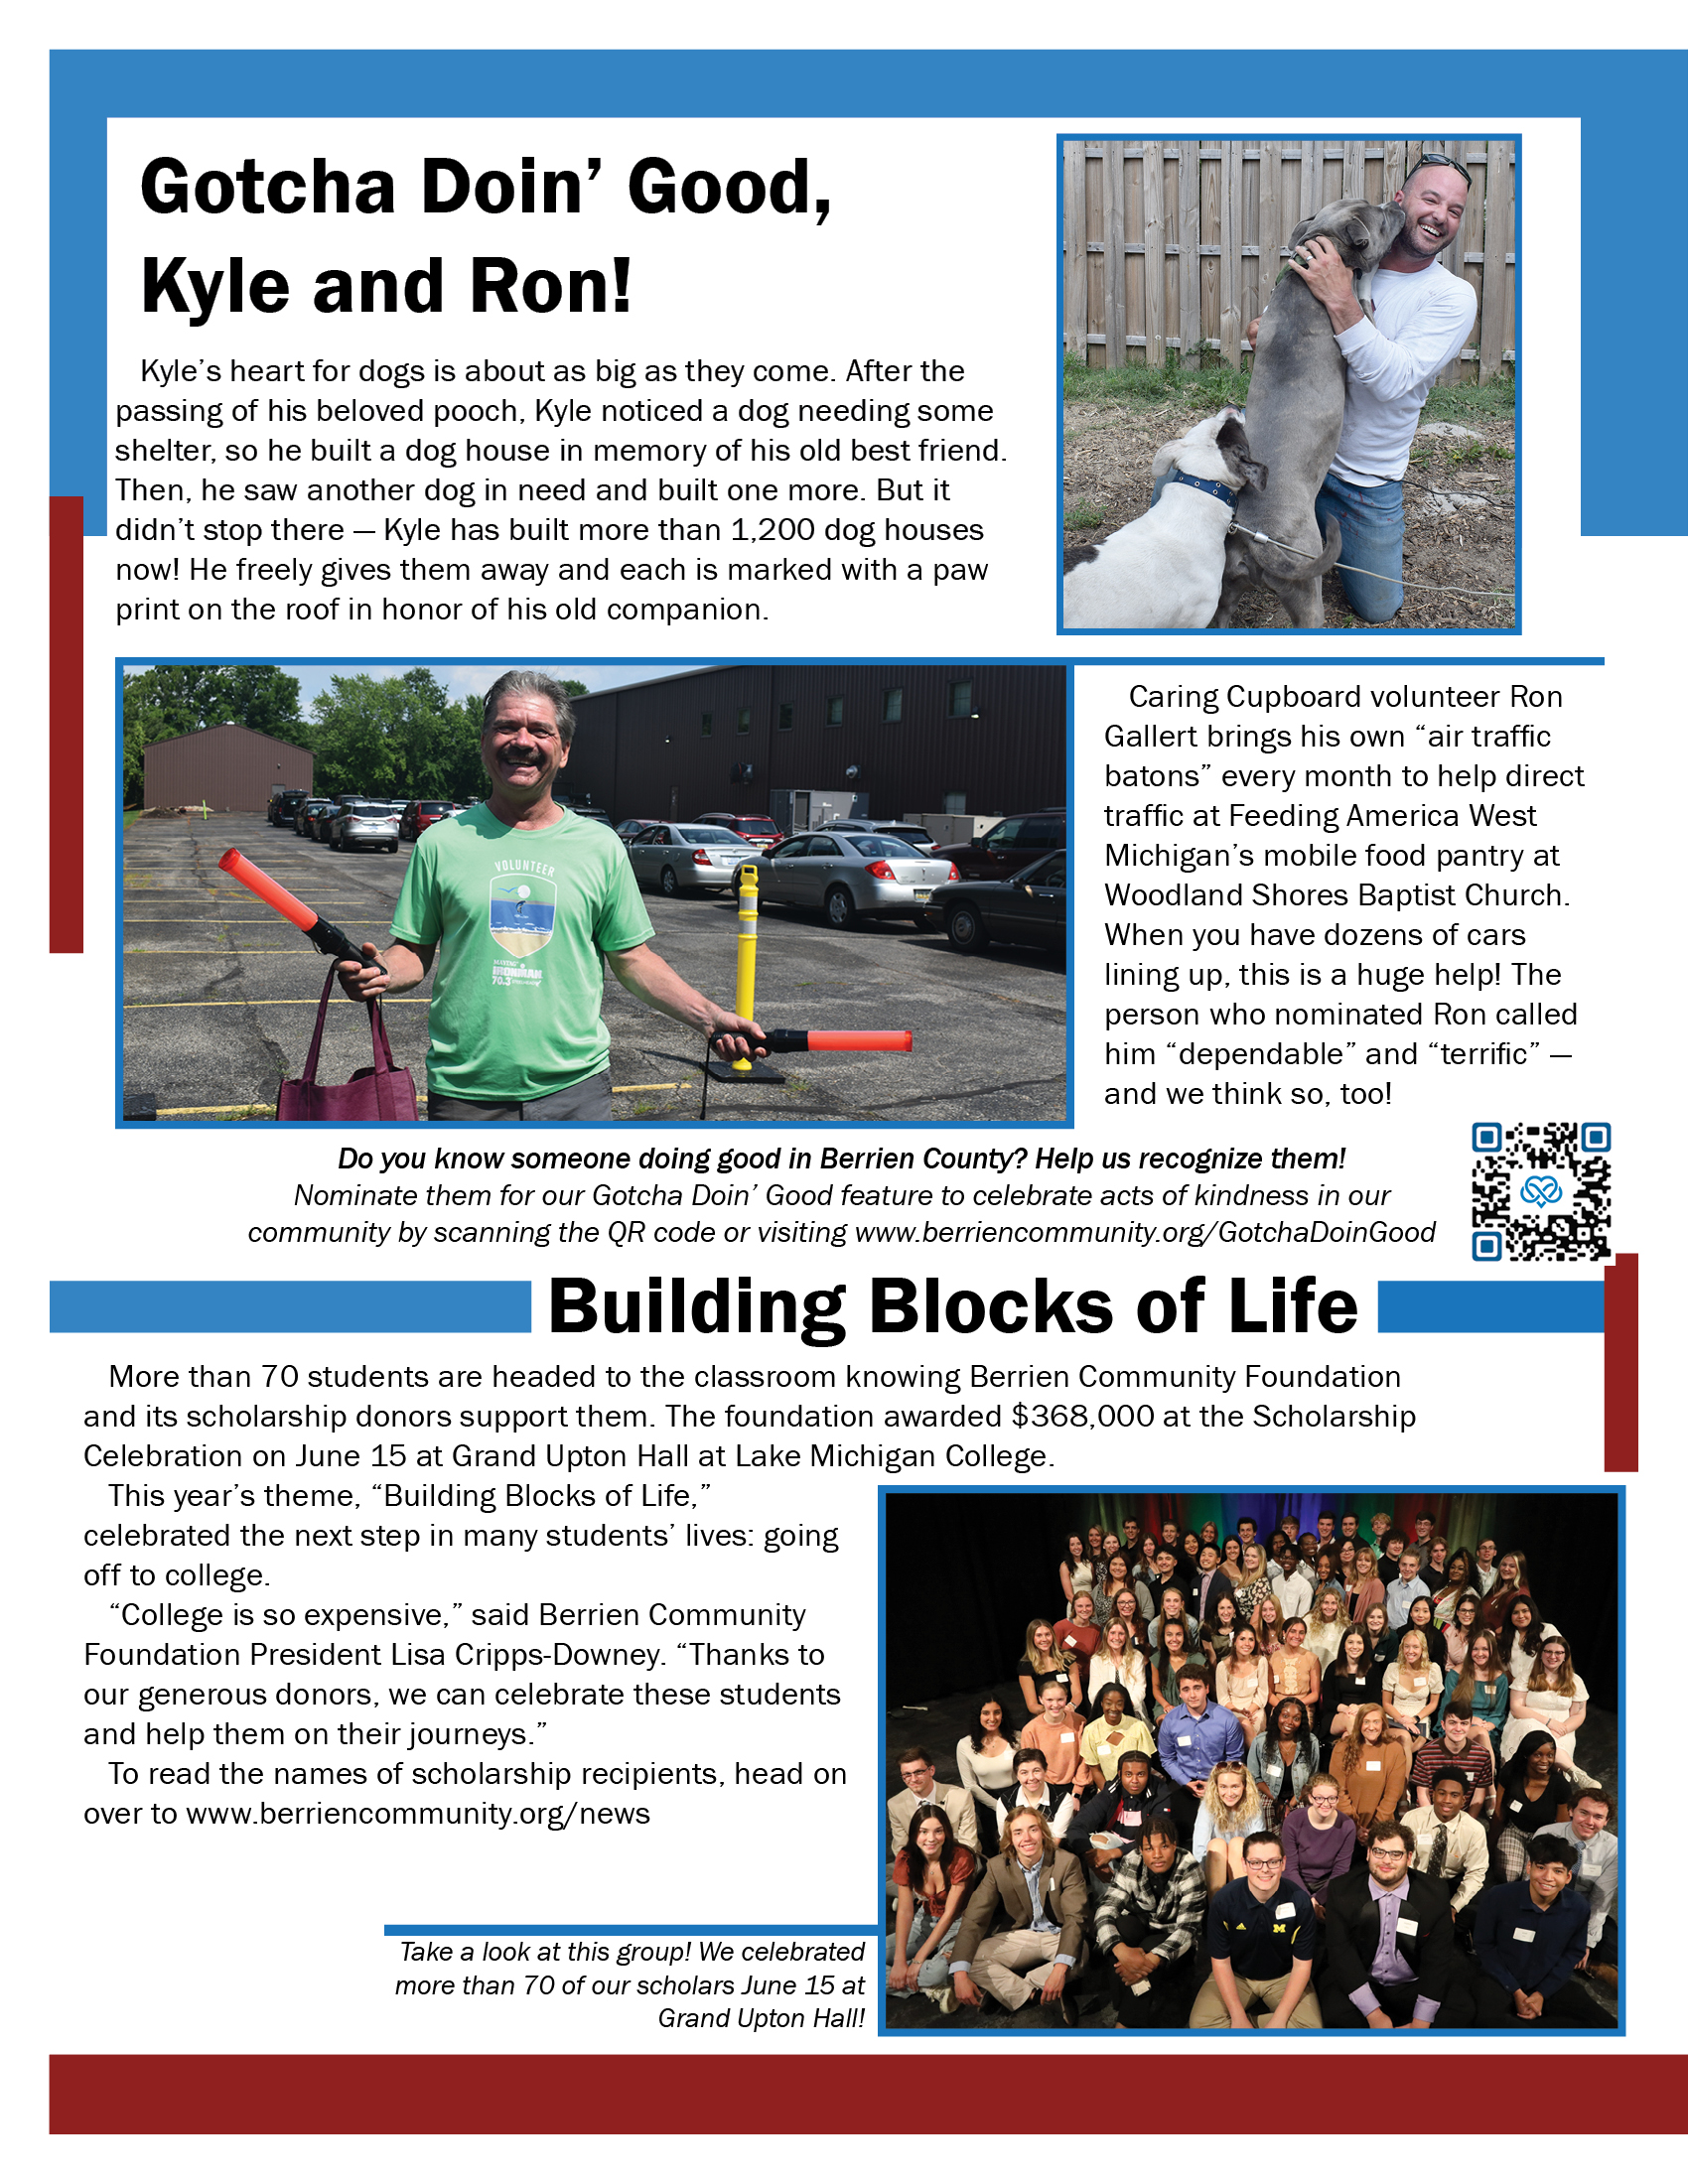 Image of the newsletter that can be downloaded and viewed as a .pdf file by clicking the link above.